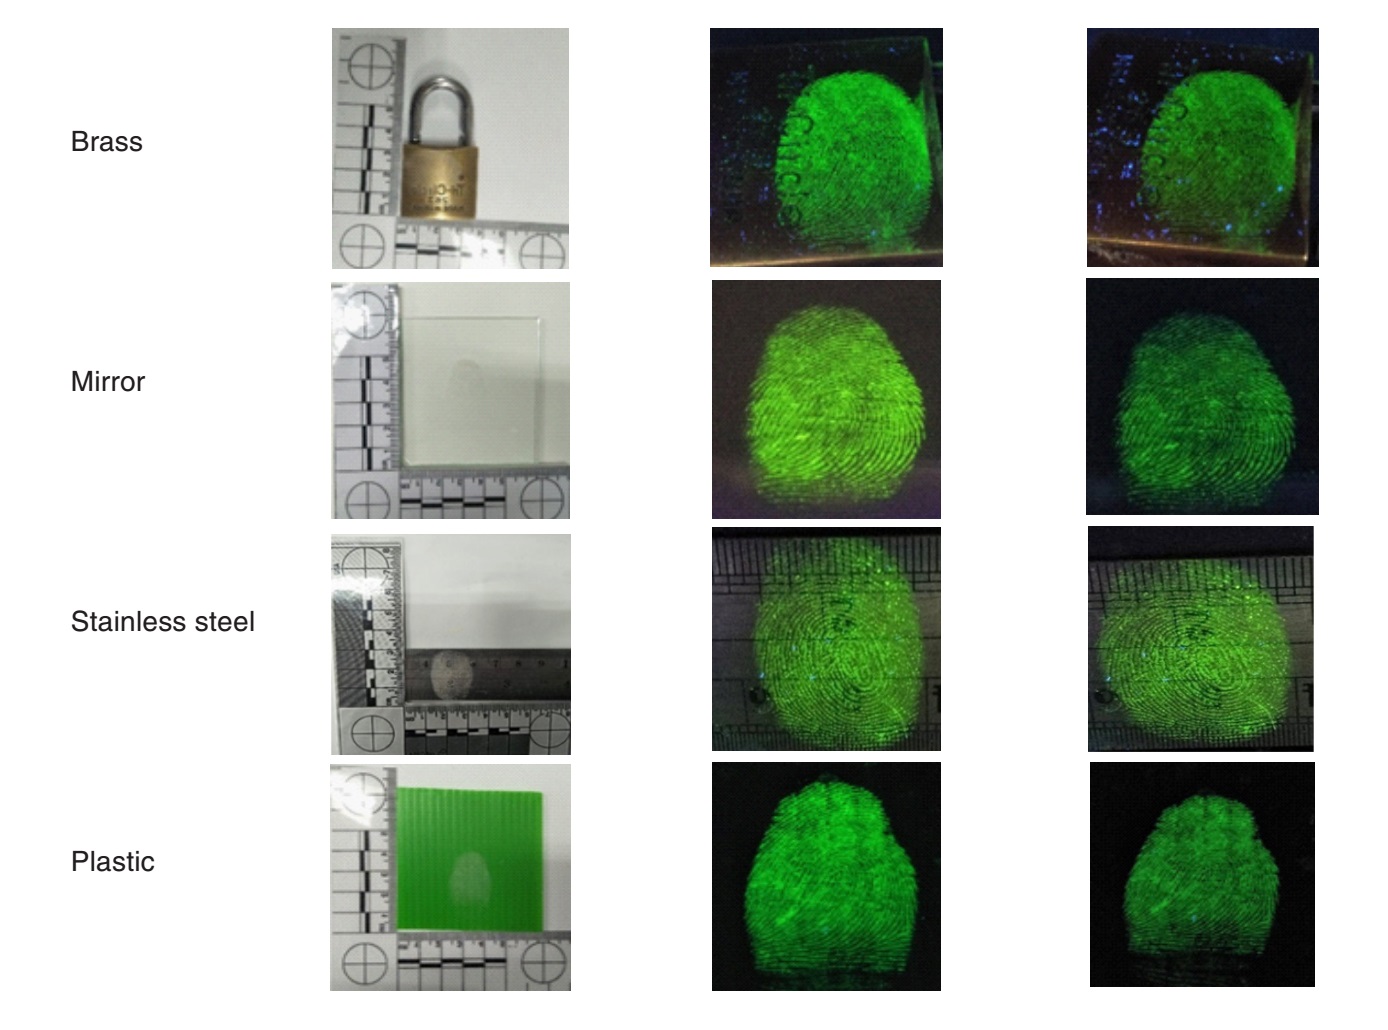 The Novel Photoluminescence Powder Synthesized from Zinc Carbonate Nanoparticles Associated with Fluorescein Dye For Its Latent Fingerprint Detection